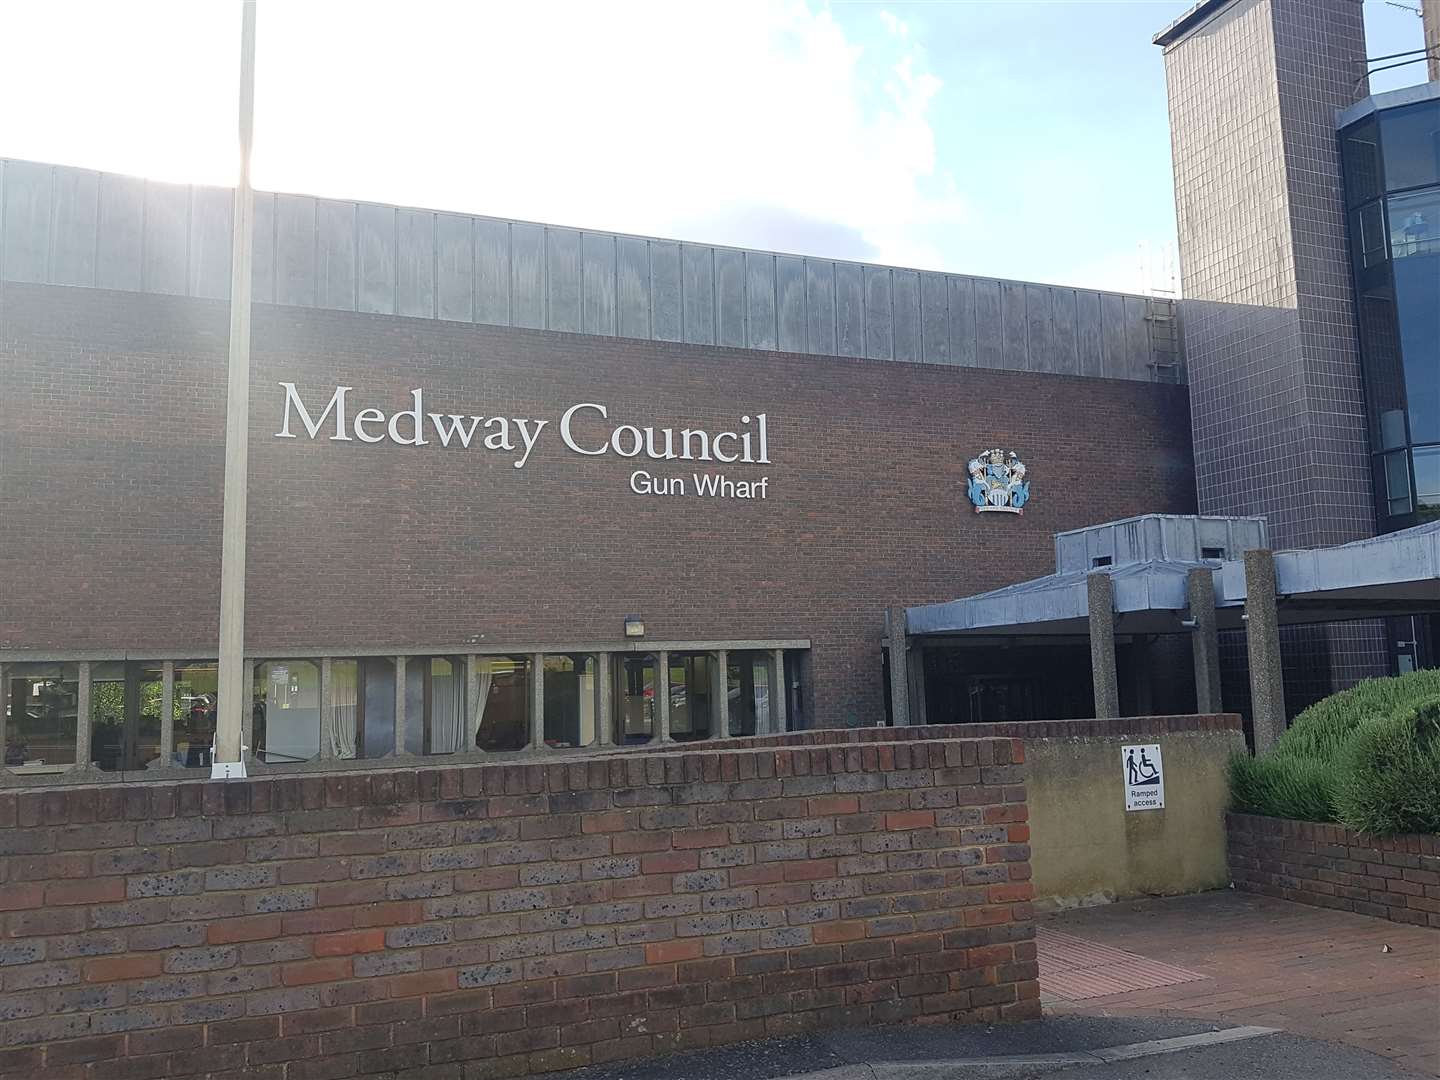 Medway Council received £1.99 million worth of funding